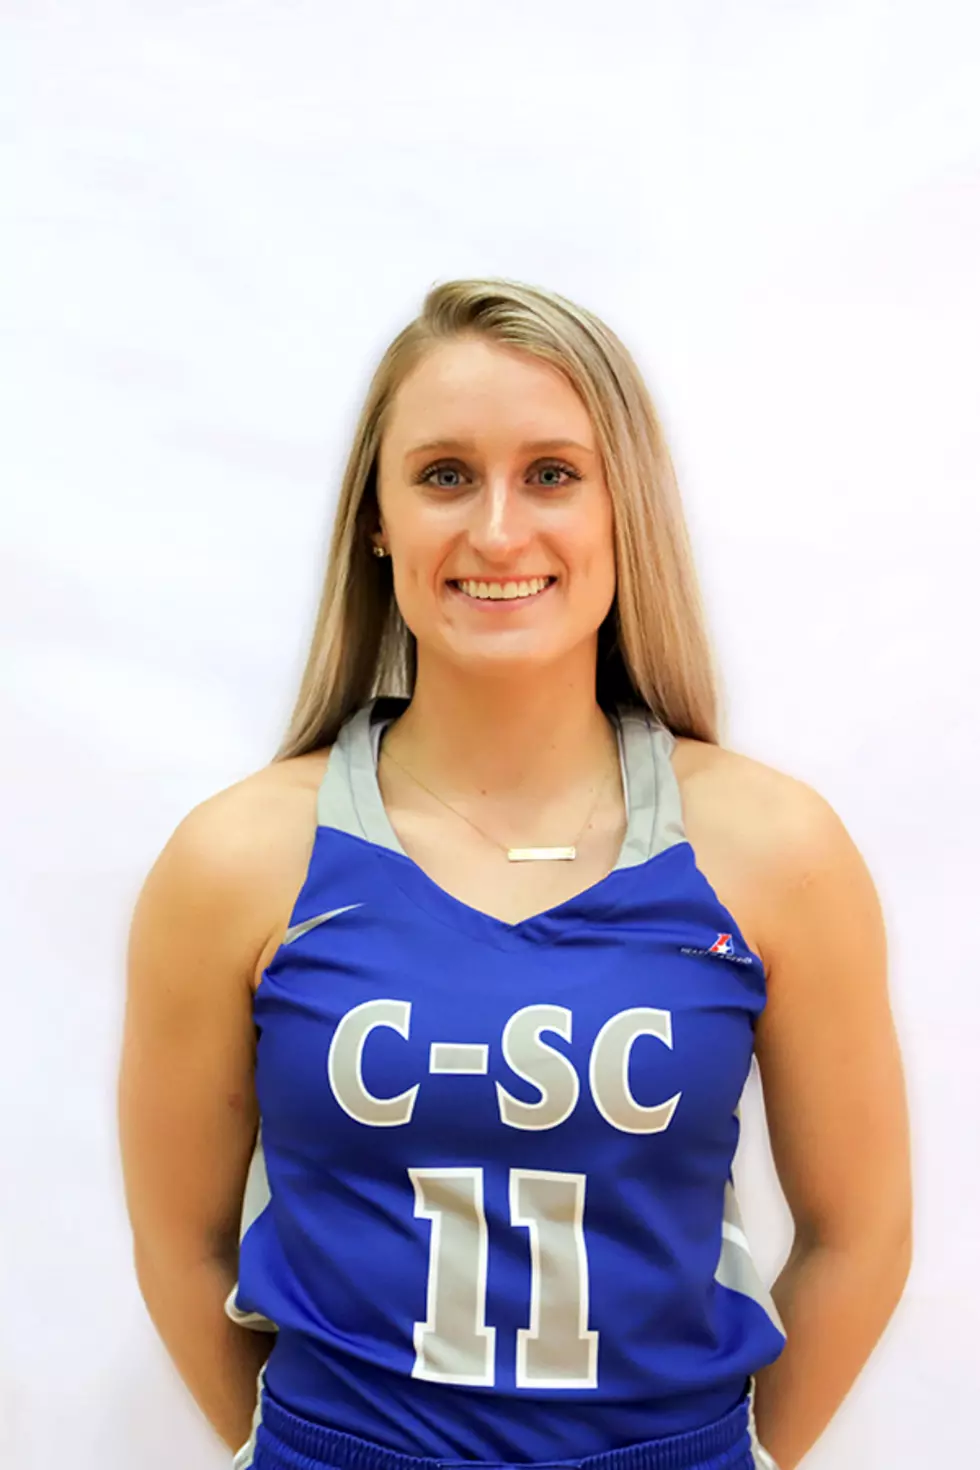 All America Honors For a Culver Stockton Basketball Player